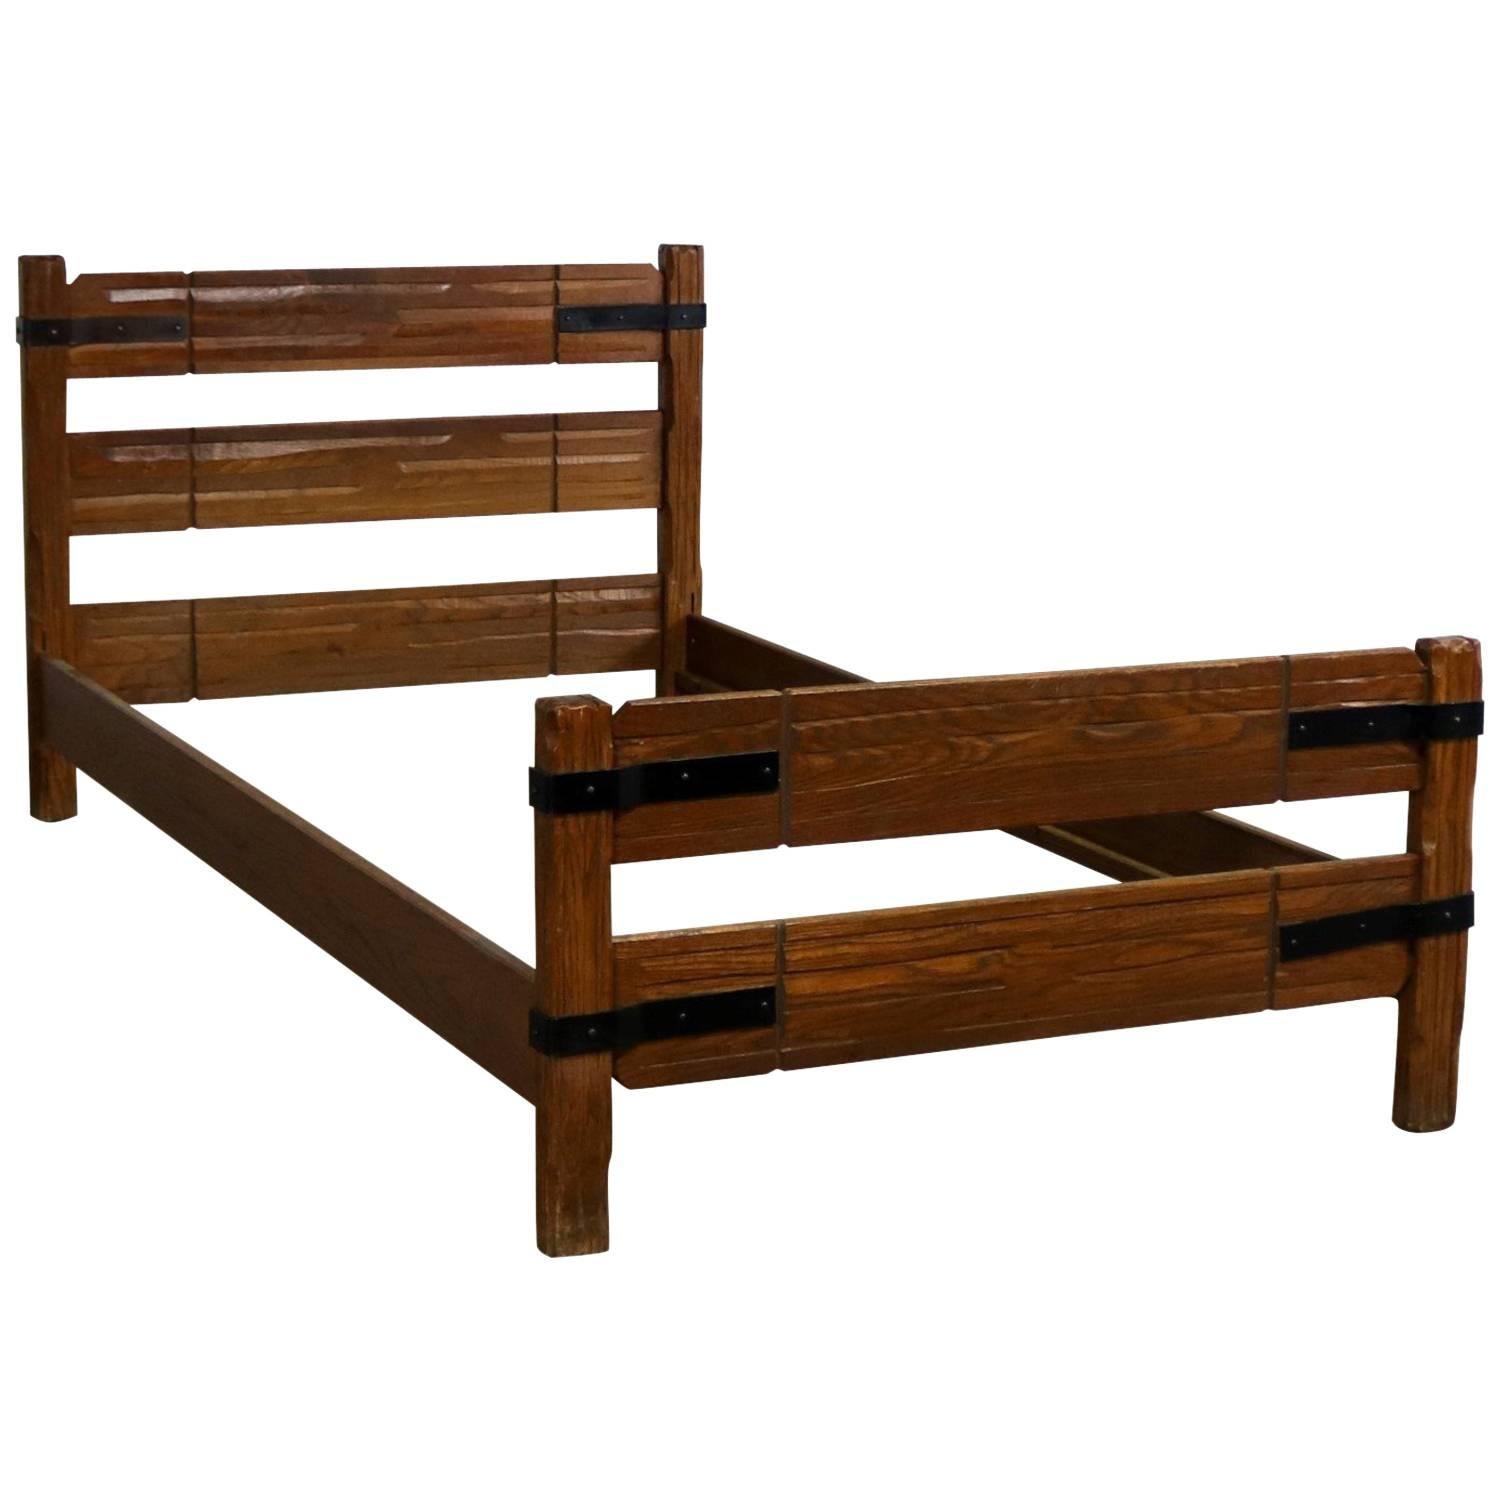 Two Ranch Oak Western Cowboy Twin Beds with Strap Details Attributed to A. Bran